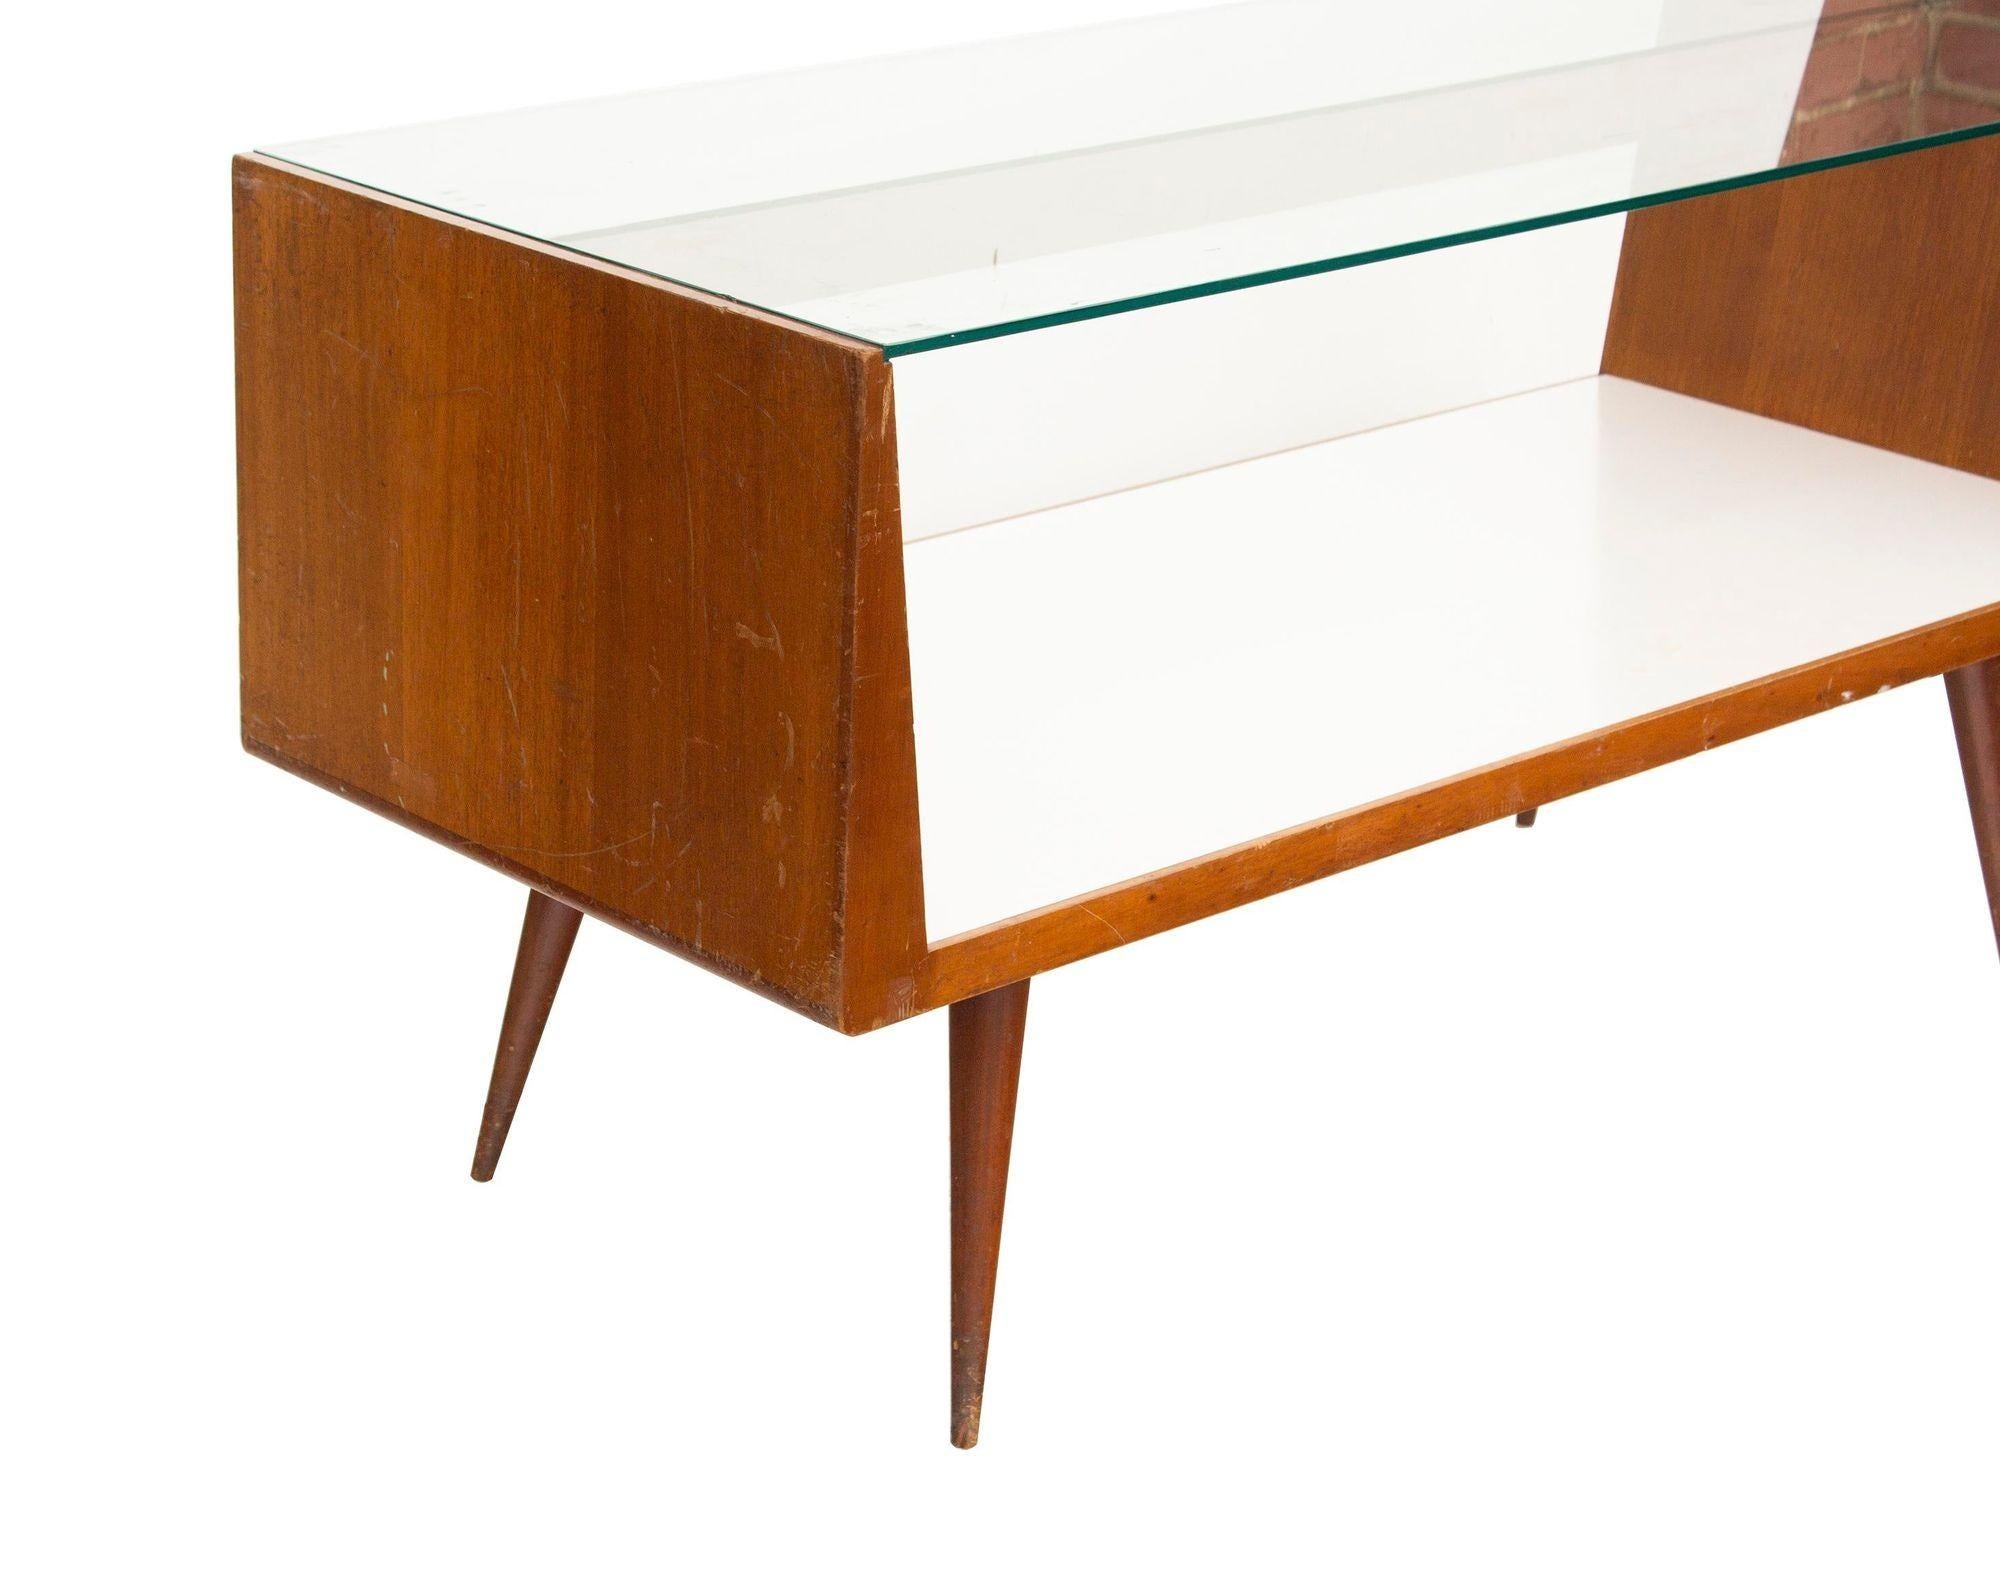 American Mid-Century Modern Walnut and Glass Display Cases, a Pair For Sale